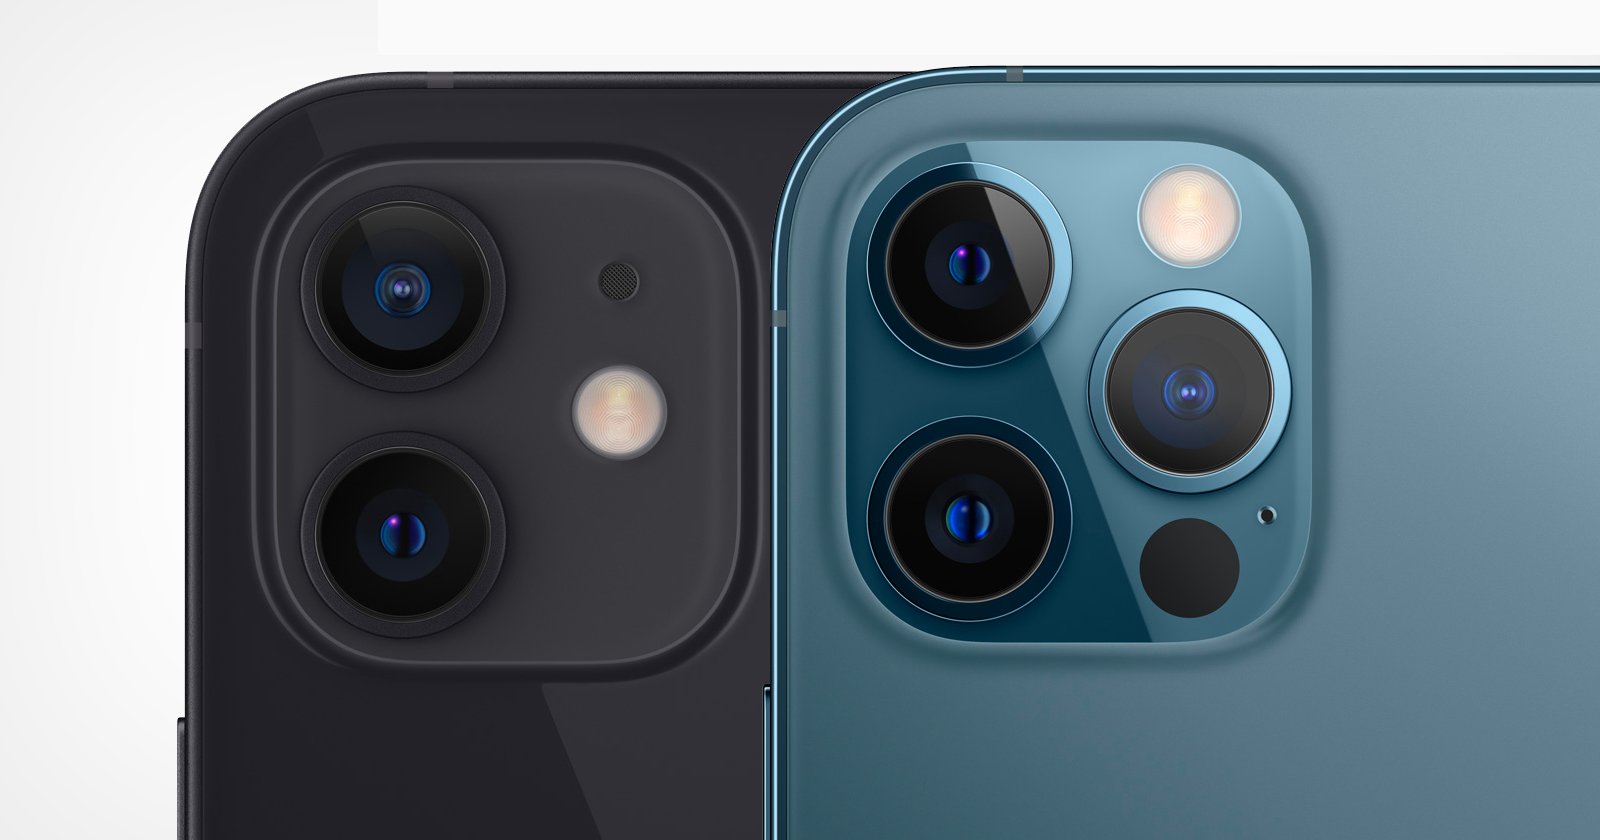 Marques Brownlee on iPhone 12 Pro Max Camera: The Differences are Mostly Imperceptible